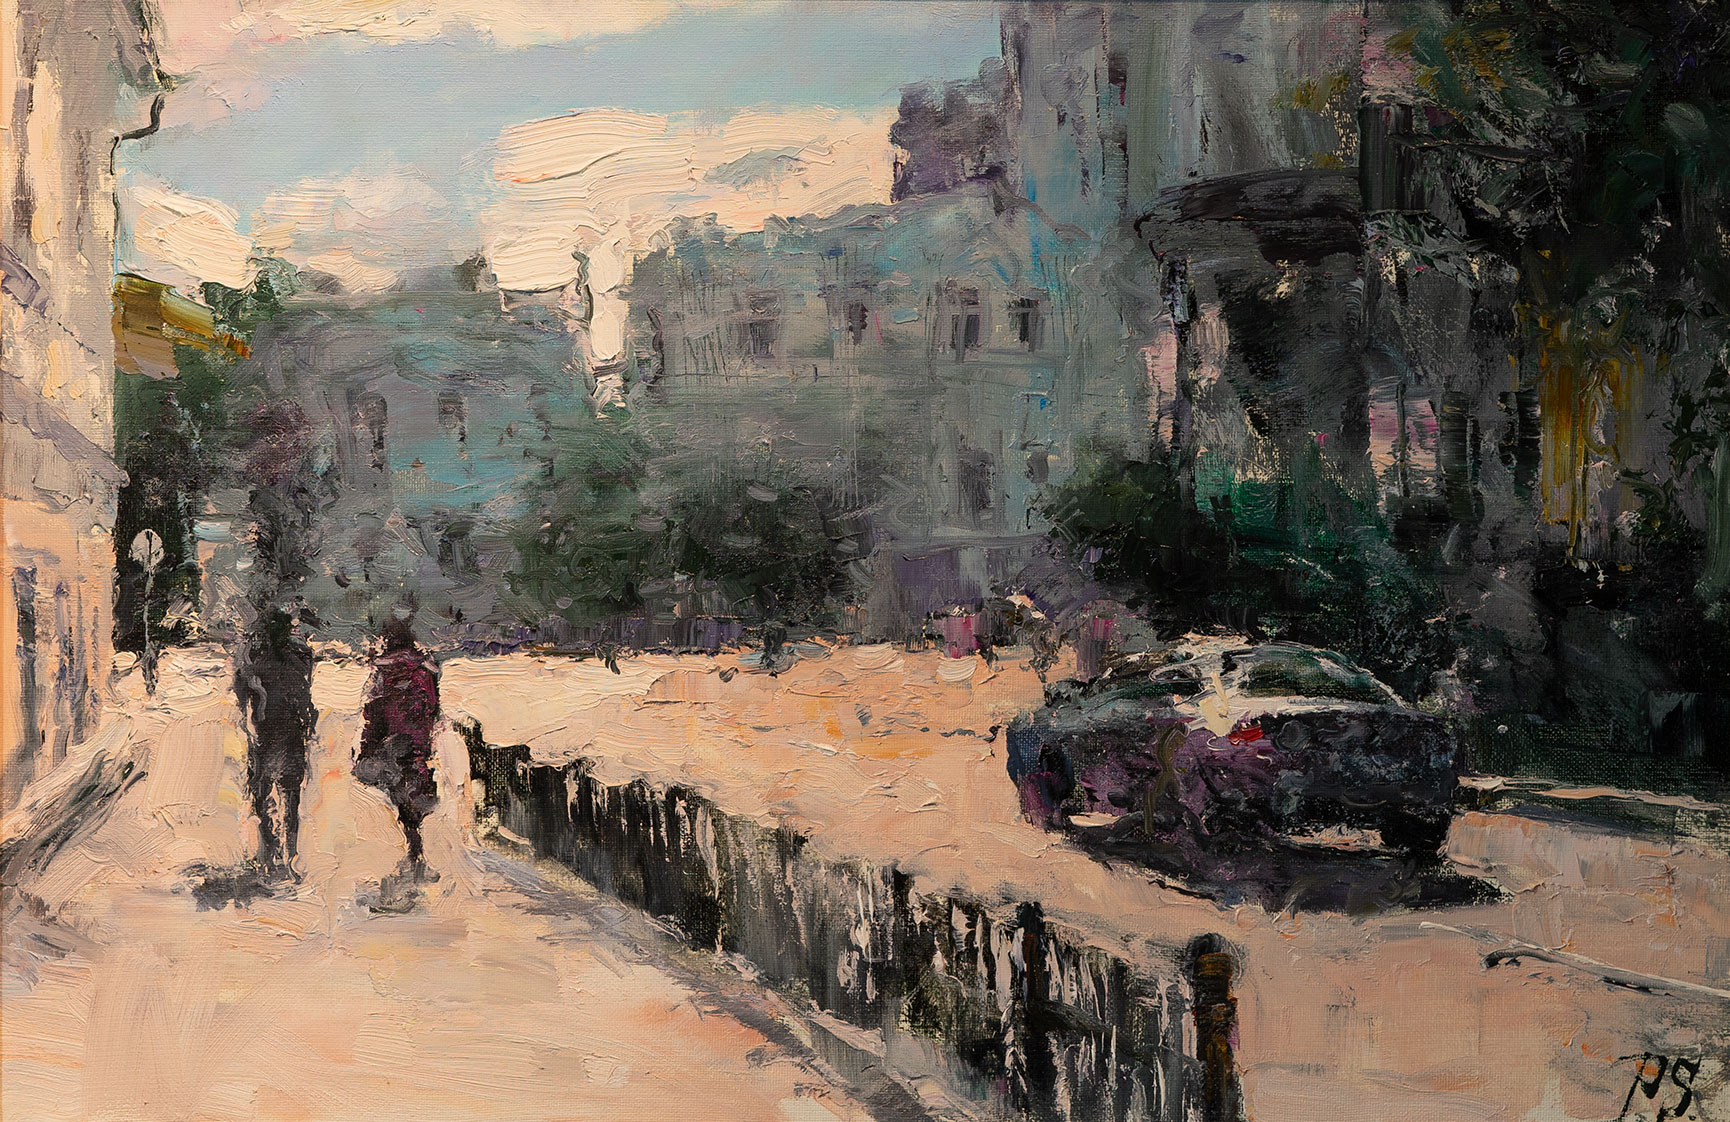 The Pedestrians and Cars - 1, Sergei Prokhorov, Buy the painting Oil